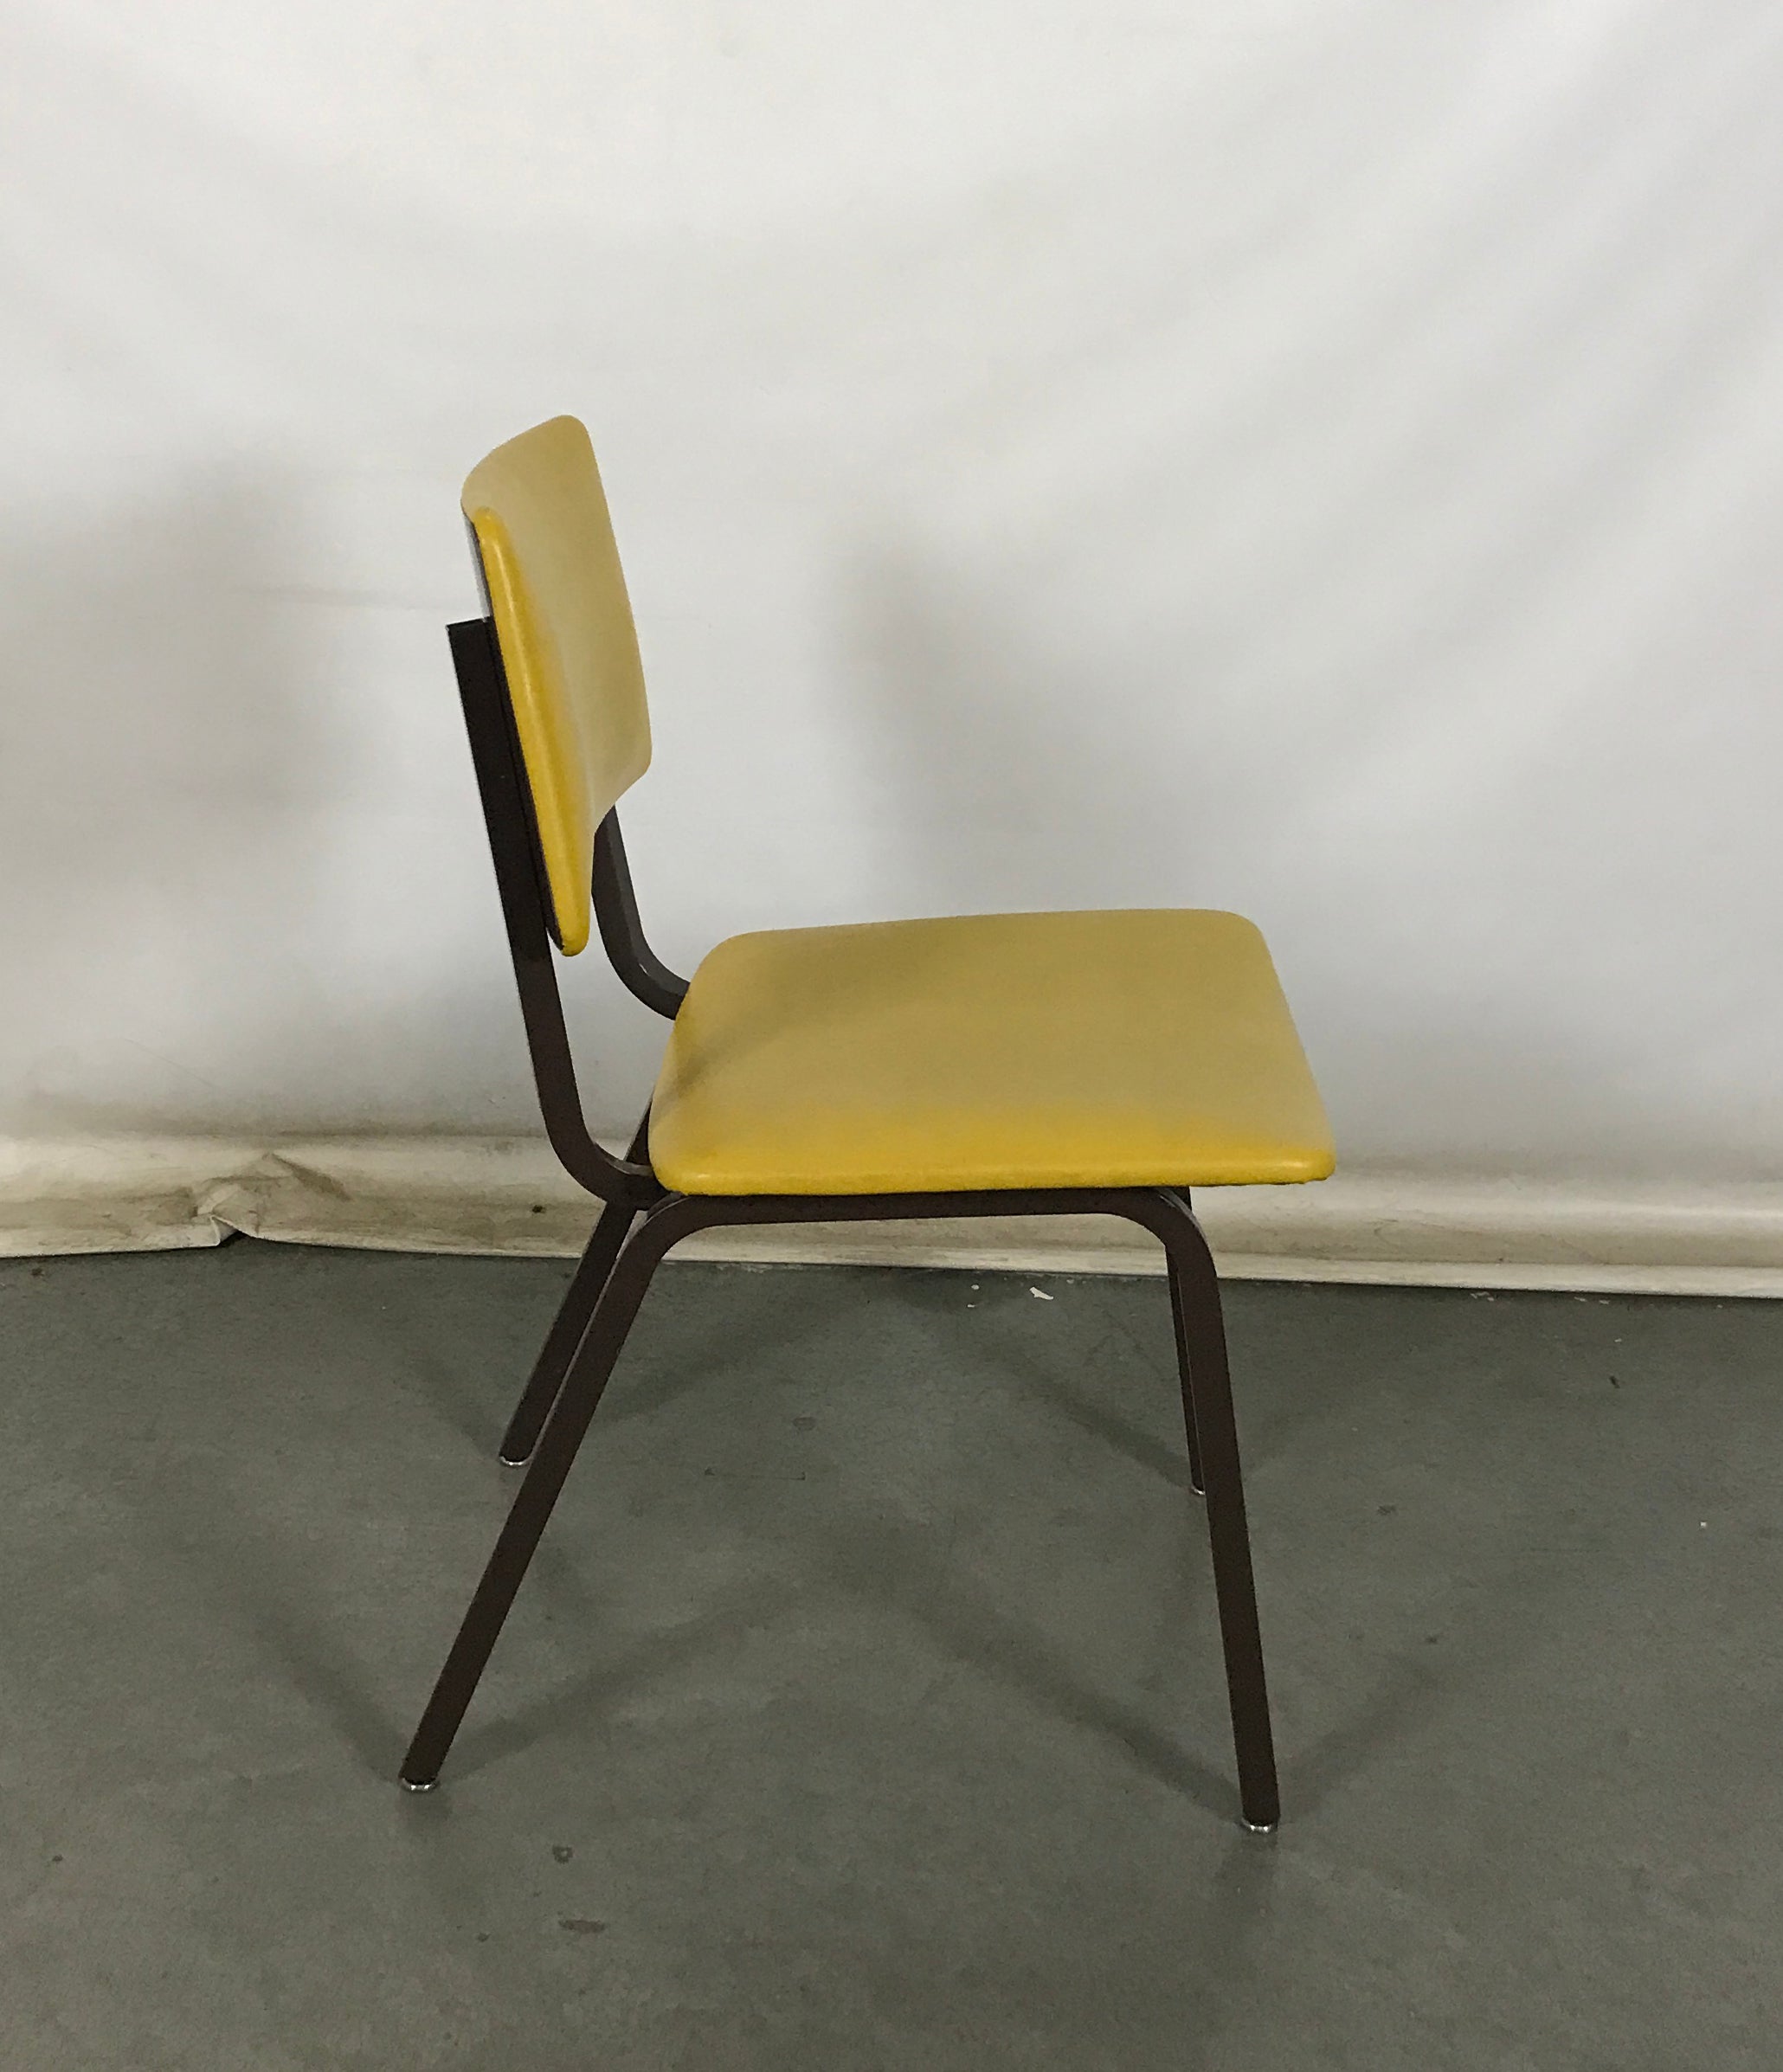 Steelcase Yellow Chair